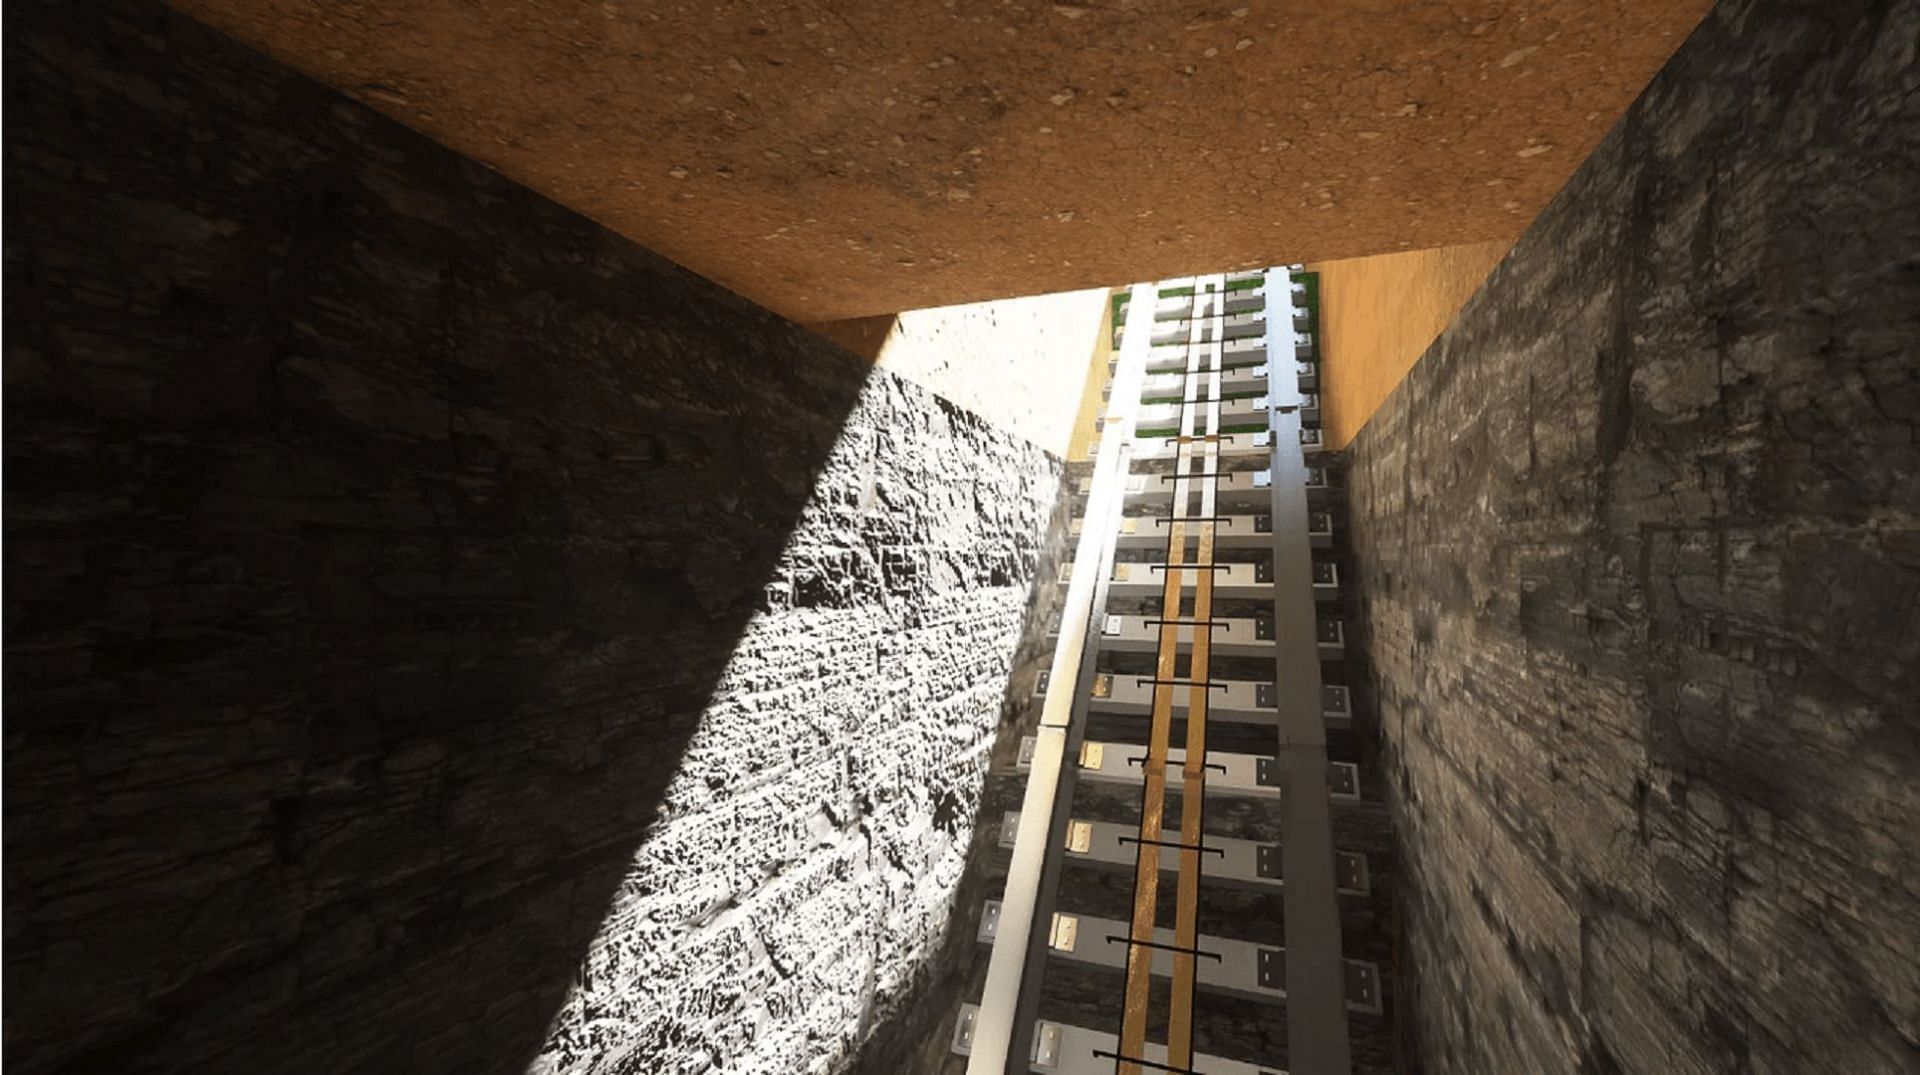 A mine and rail system in Legendary RT (Image via LEGENDARY RT TEXTURES/PlanetMinecraft)